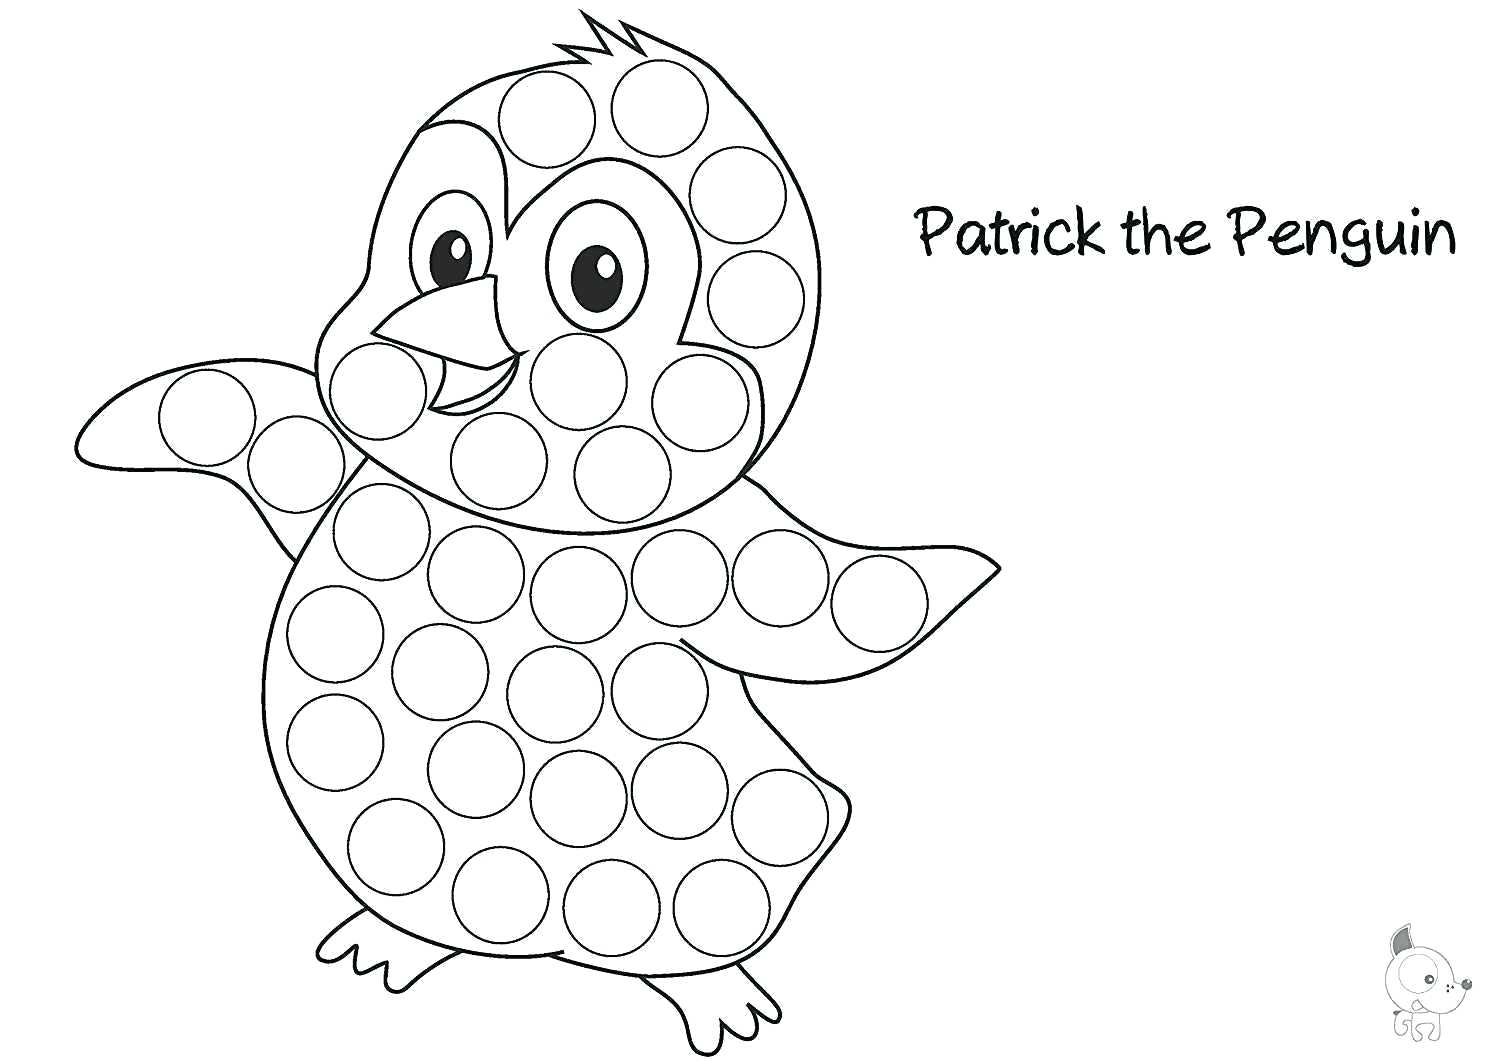 Coloring Book : 36 Free Dot Marker Coloring Page Image - Coloring Home